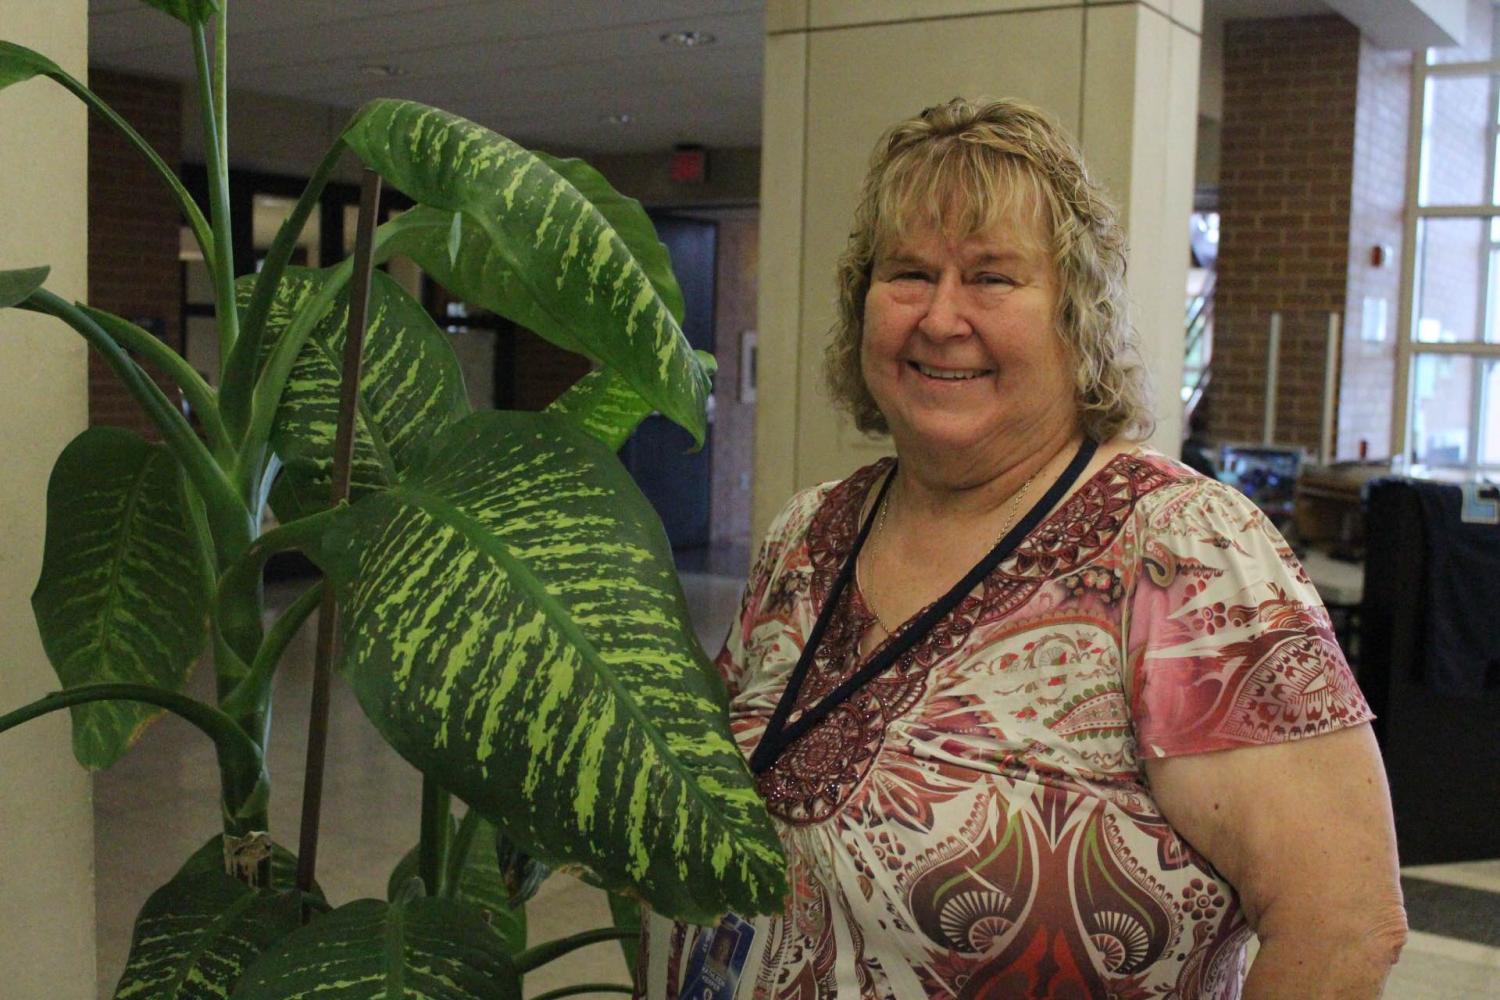 Mrs. Kathleen Kerper poses for a photo at NPHS. The Special Education Teacher has served the NPSD for 38 years and will be retiring this year.